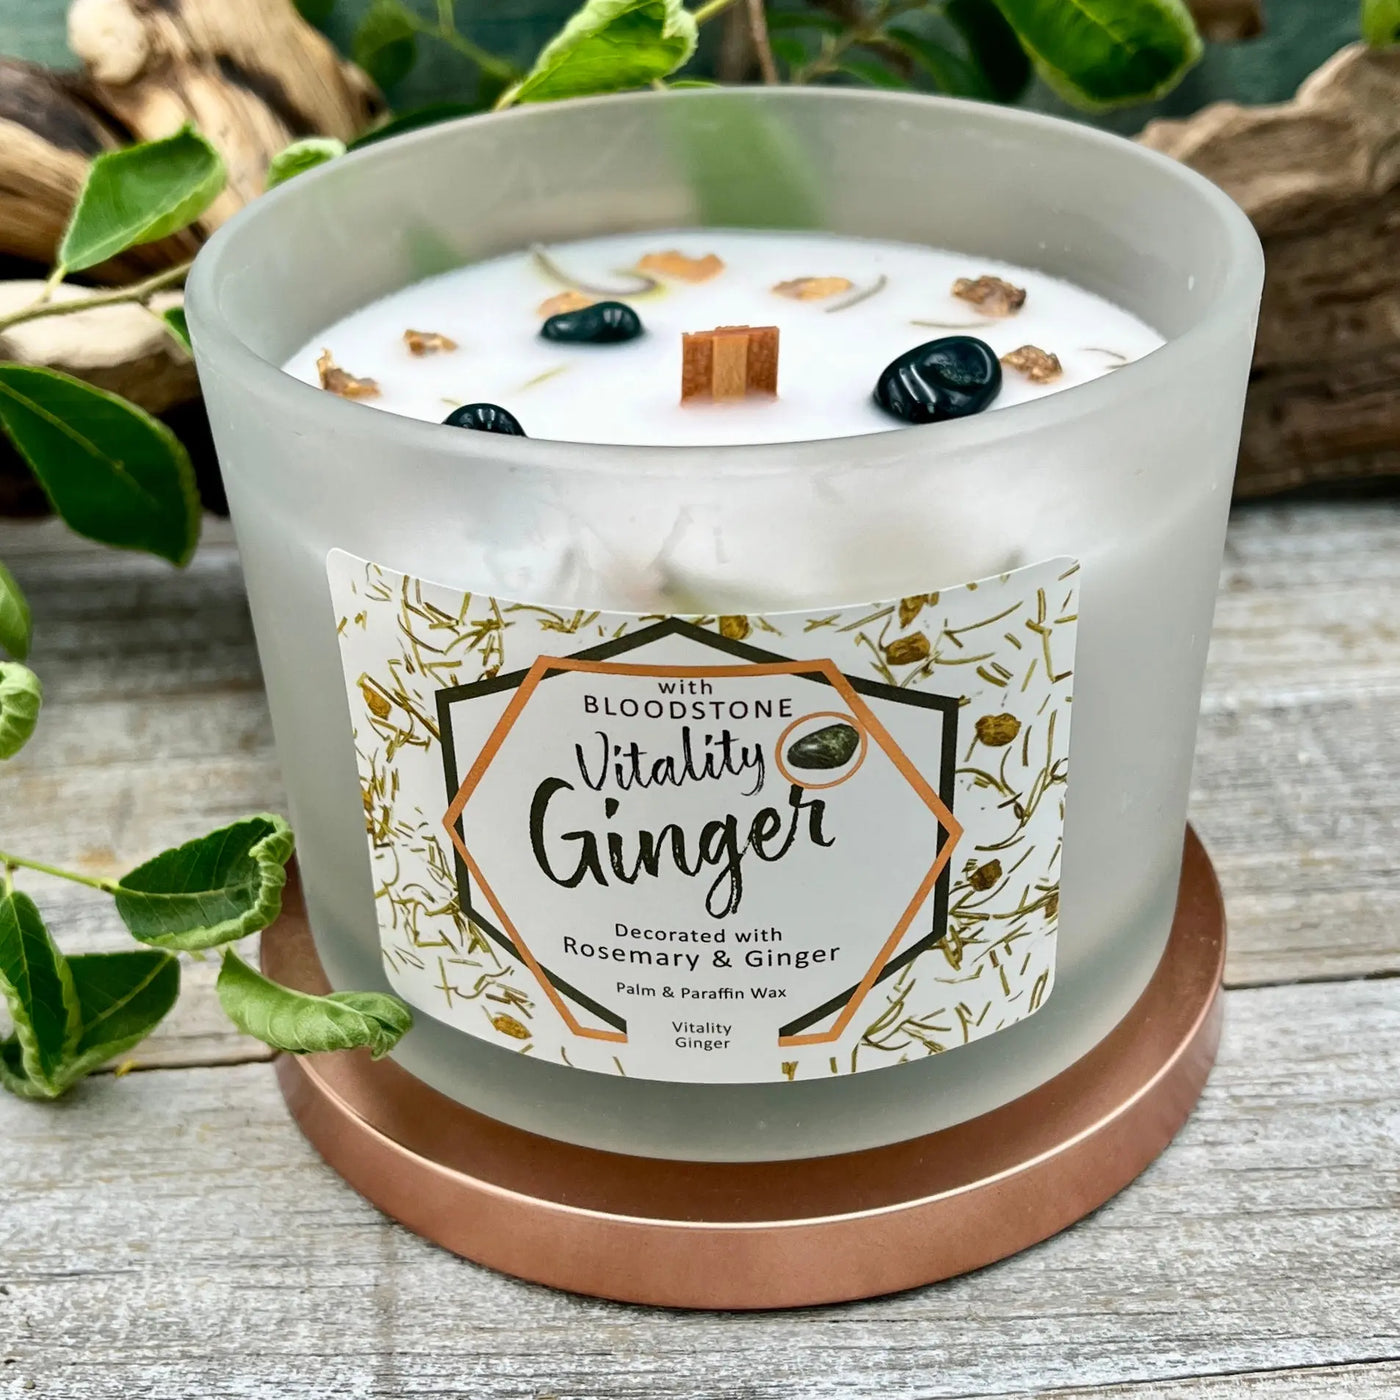 Vitality Ginger Candle with Bloodstone